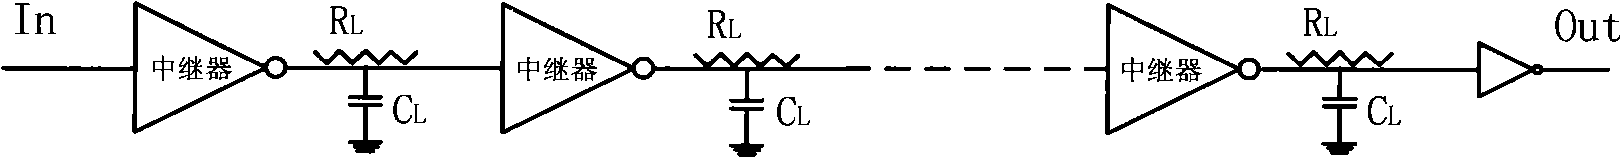 Difference interface circuit for on-chip long lines interlinkage